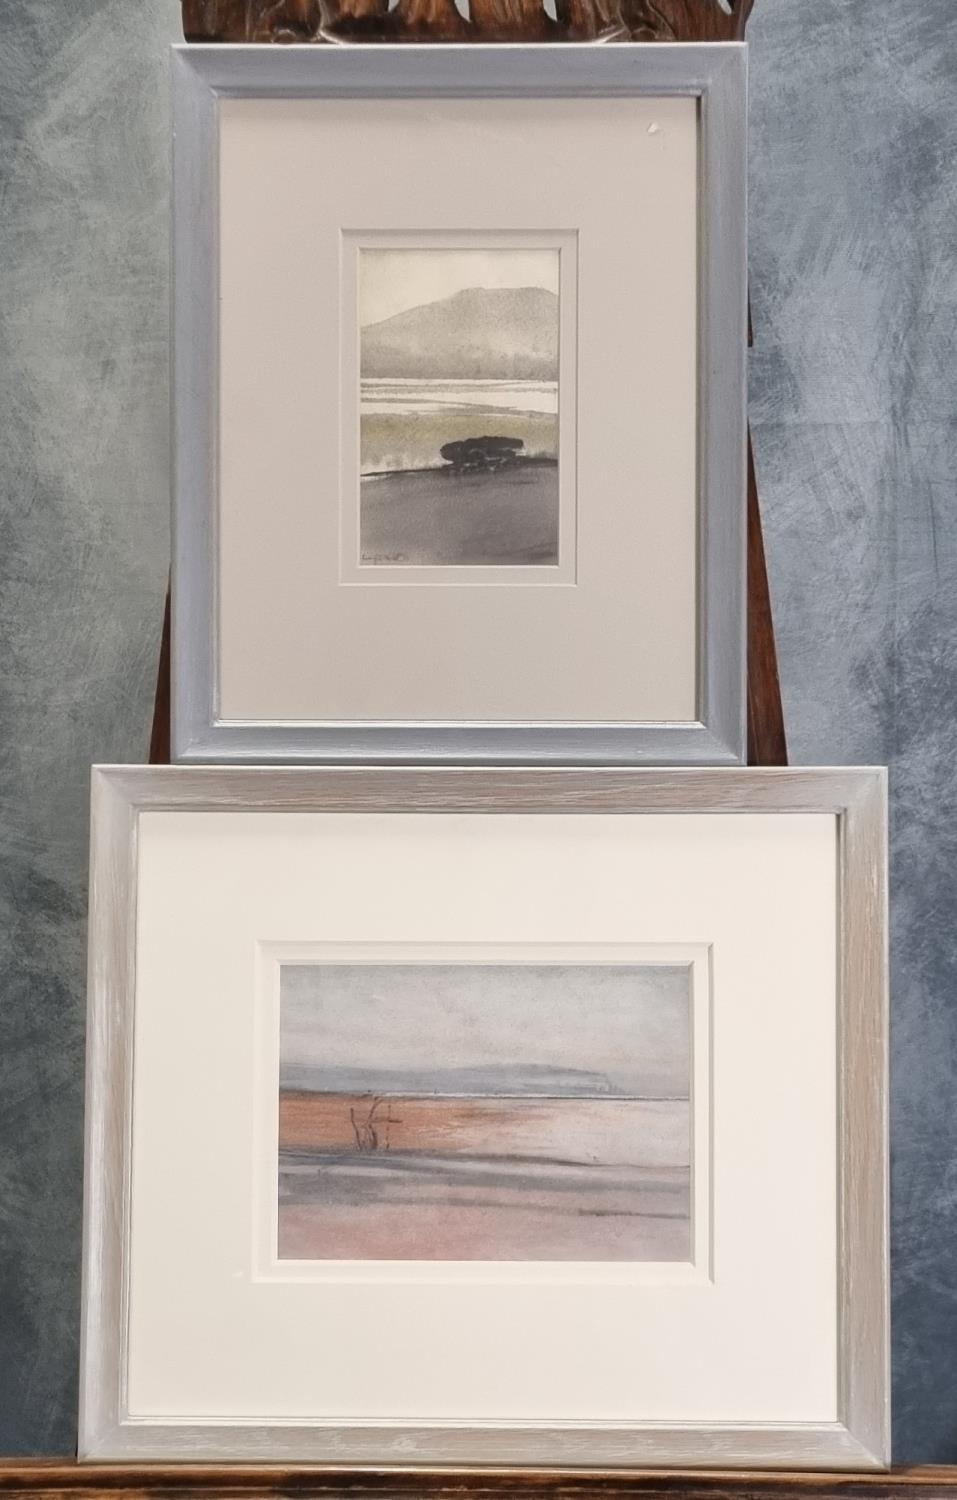 Roger Cecil (Welsh born 1942, died 2015), 'Seashore' and another estuary landscape, one signed,